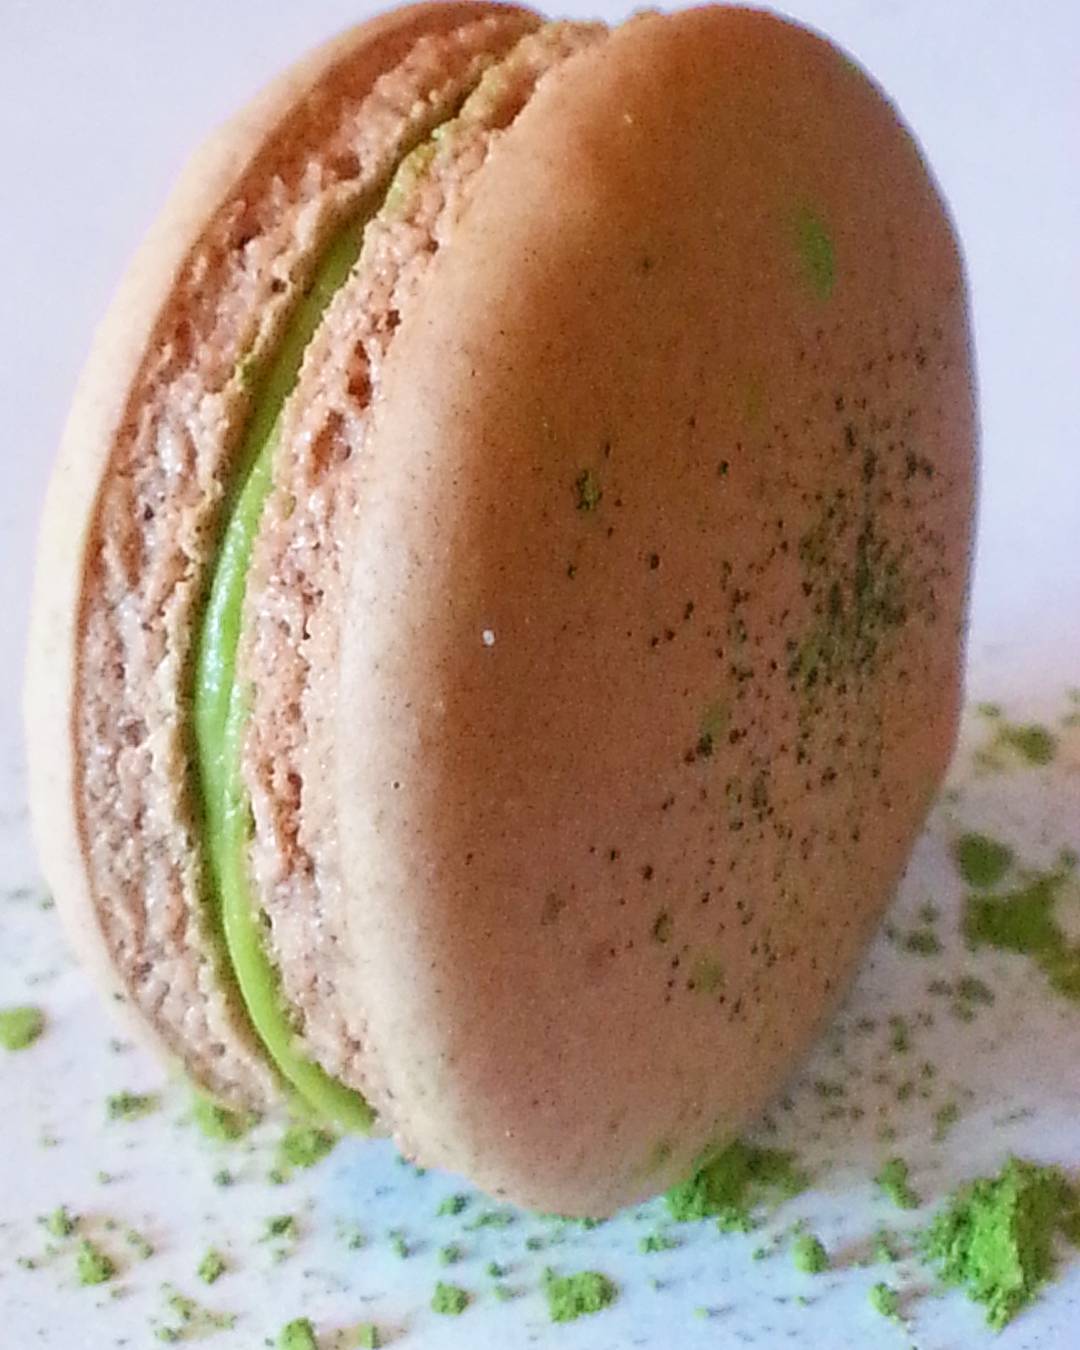 This was one of the first macaron flavors we produced at Belle…Matcha Cocoa…created with Green Tea Matcha and Chocolate shell. For Matcha lovers it was a true to flavor: slightly bitter nuttiness and the cocoa added a nice layer of flavor complexity.
🙄
I would imagine more than a few of you are thinking that you have not seen this flavor in the case…you would be correct.
🙄
I would say within the first few weeks of opening someone reviewed this mac and said it tasted like burnt plastic…whaaaaat 🤤
🙄
Well as we approach St. Patrick’s Day and look for natural green foods (we have a FAB green apple planned on the doughnut side) we will drop Matcha back into the case and hope for the best!
🙄
Happy Macaron Monday!
@bellekitchenokc #macaron #macarons #food #foodie #foodporn #instafood #instagood #f52grams #cookingchannel #blackbookali #matcha #cocoa #chocolate #love #yummy #yes #keepitlocalok #okc #visitokc #TeamGOT7 #japanese #oklahomacity #macaronmonday #beautiful #bellekitchen